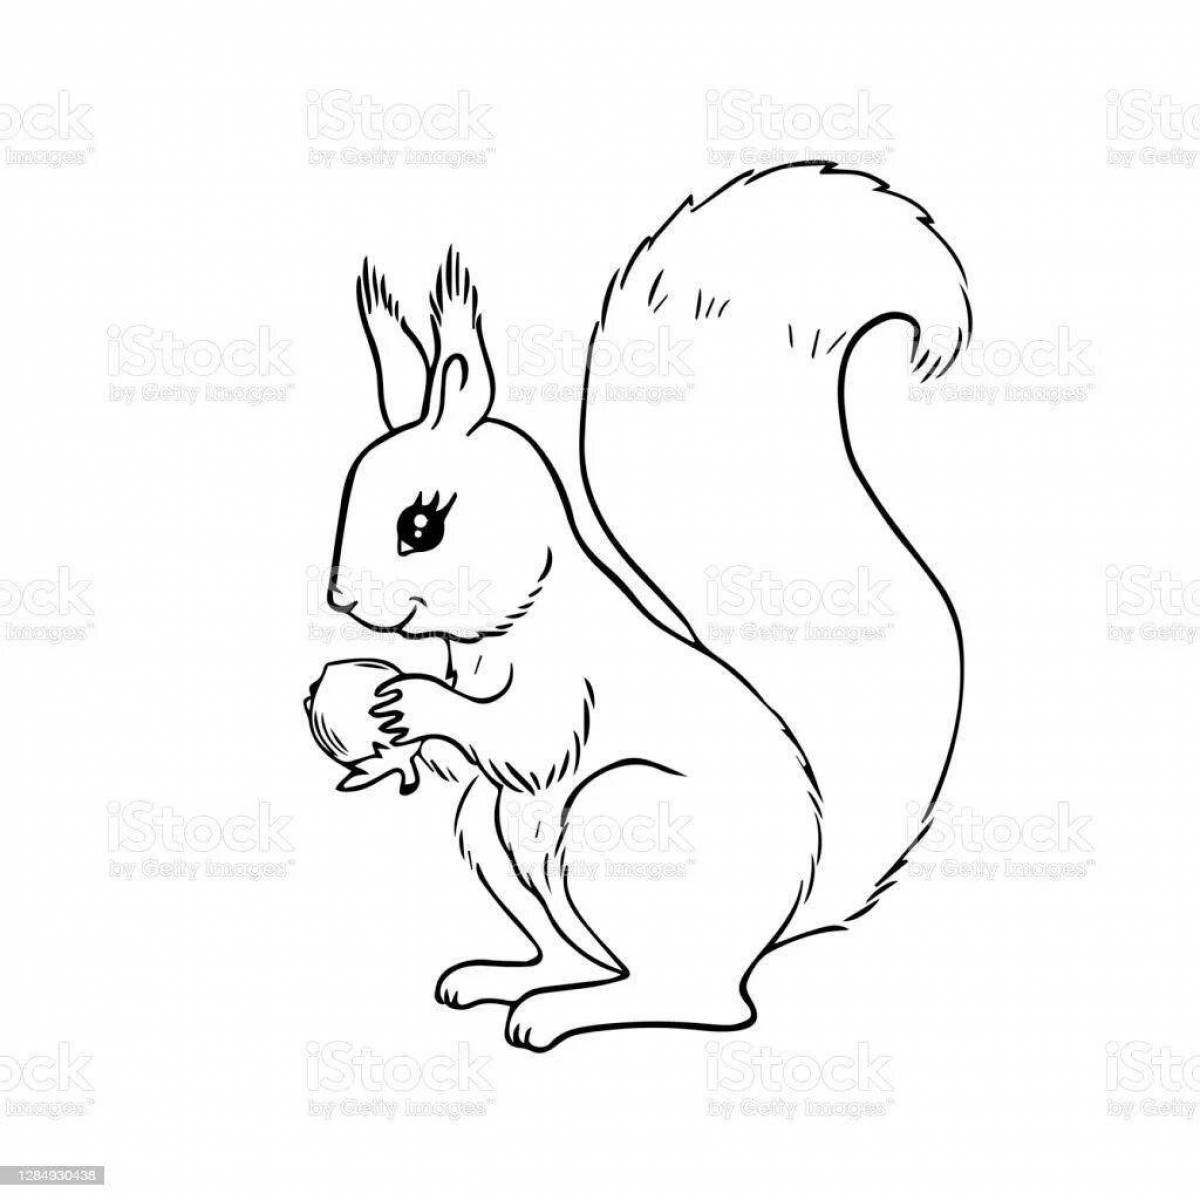 Animated coloring of a squirrel with nuts